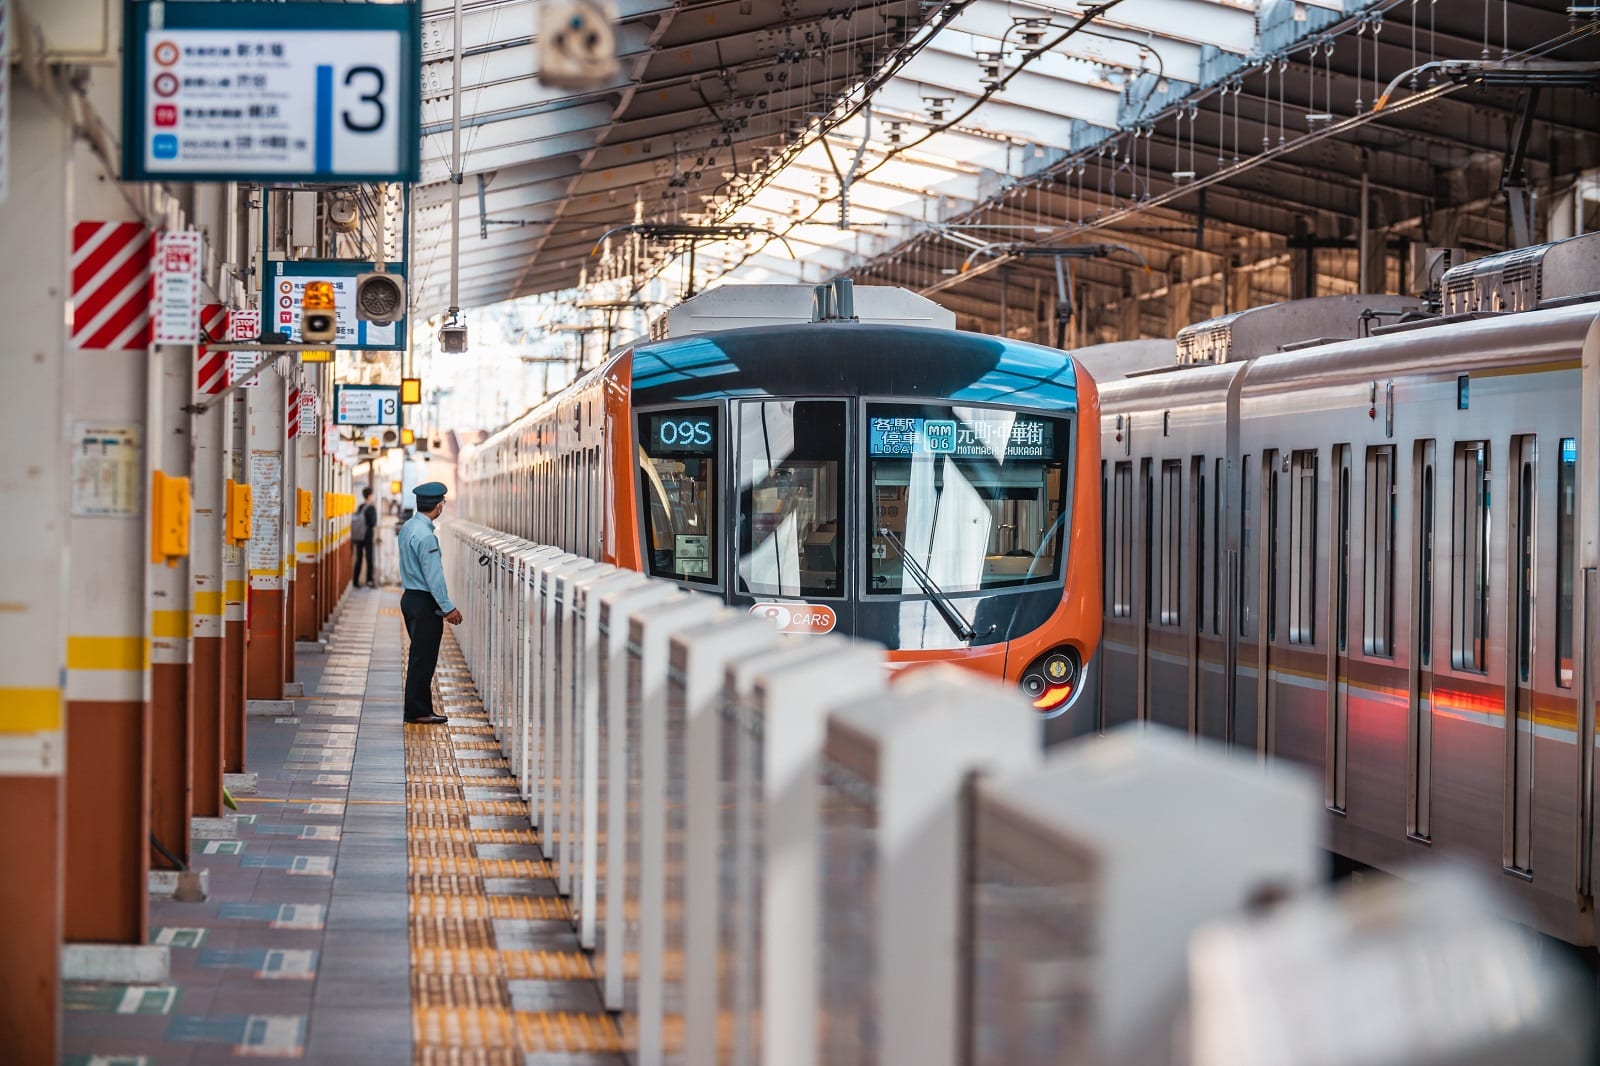 <p><span>Tokyo’s train and subway system is renowned for its punctuality and cleanliness. The system can seem complex, but it’s efficiently organized. Stations and trains are well-signed in English, which aids navigation. </span></p> <p><b>Insider’s Tip: </b><span>Purchase a prepaid Suica or Pasmo card for easy transit across different lines. </span></p> <p><b>When to Travel: </b><span>Avoid rush hour times, especially early in the morning and late in the afternoon on weekdays. </span></p>